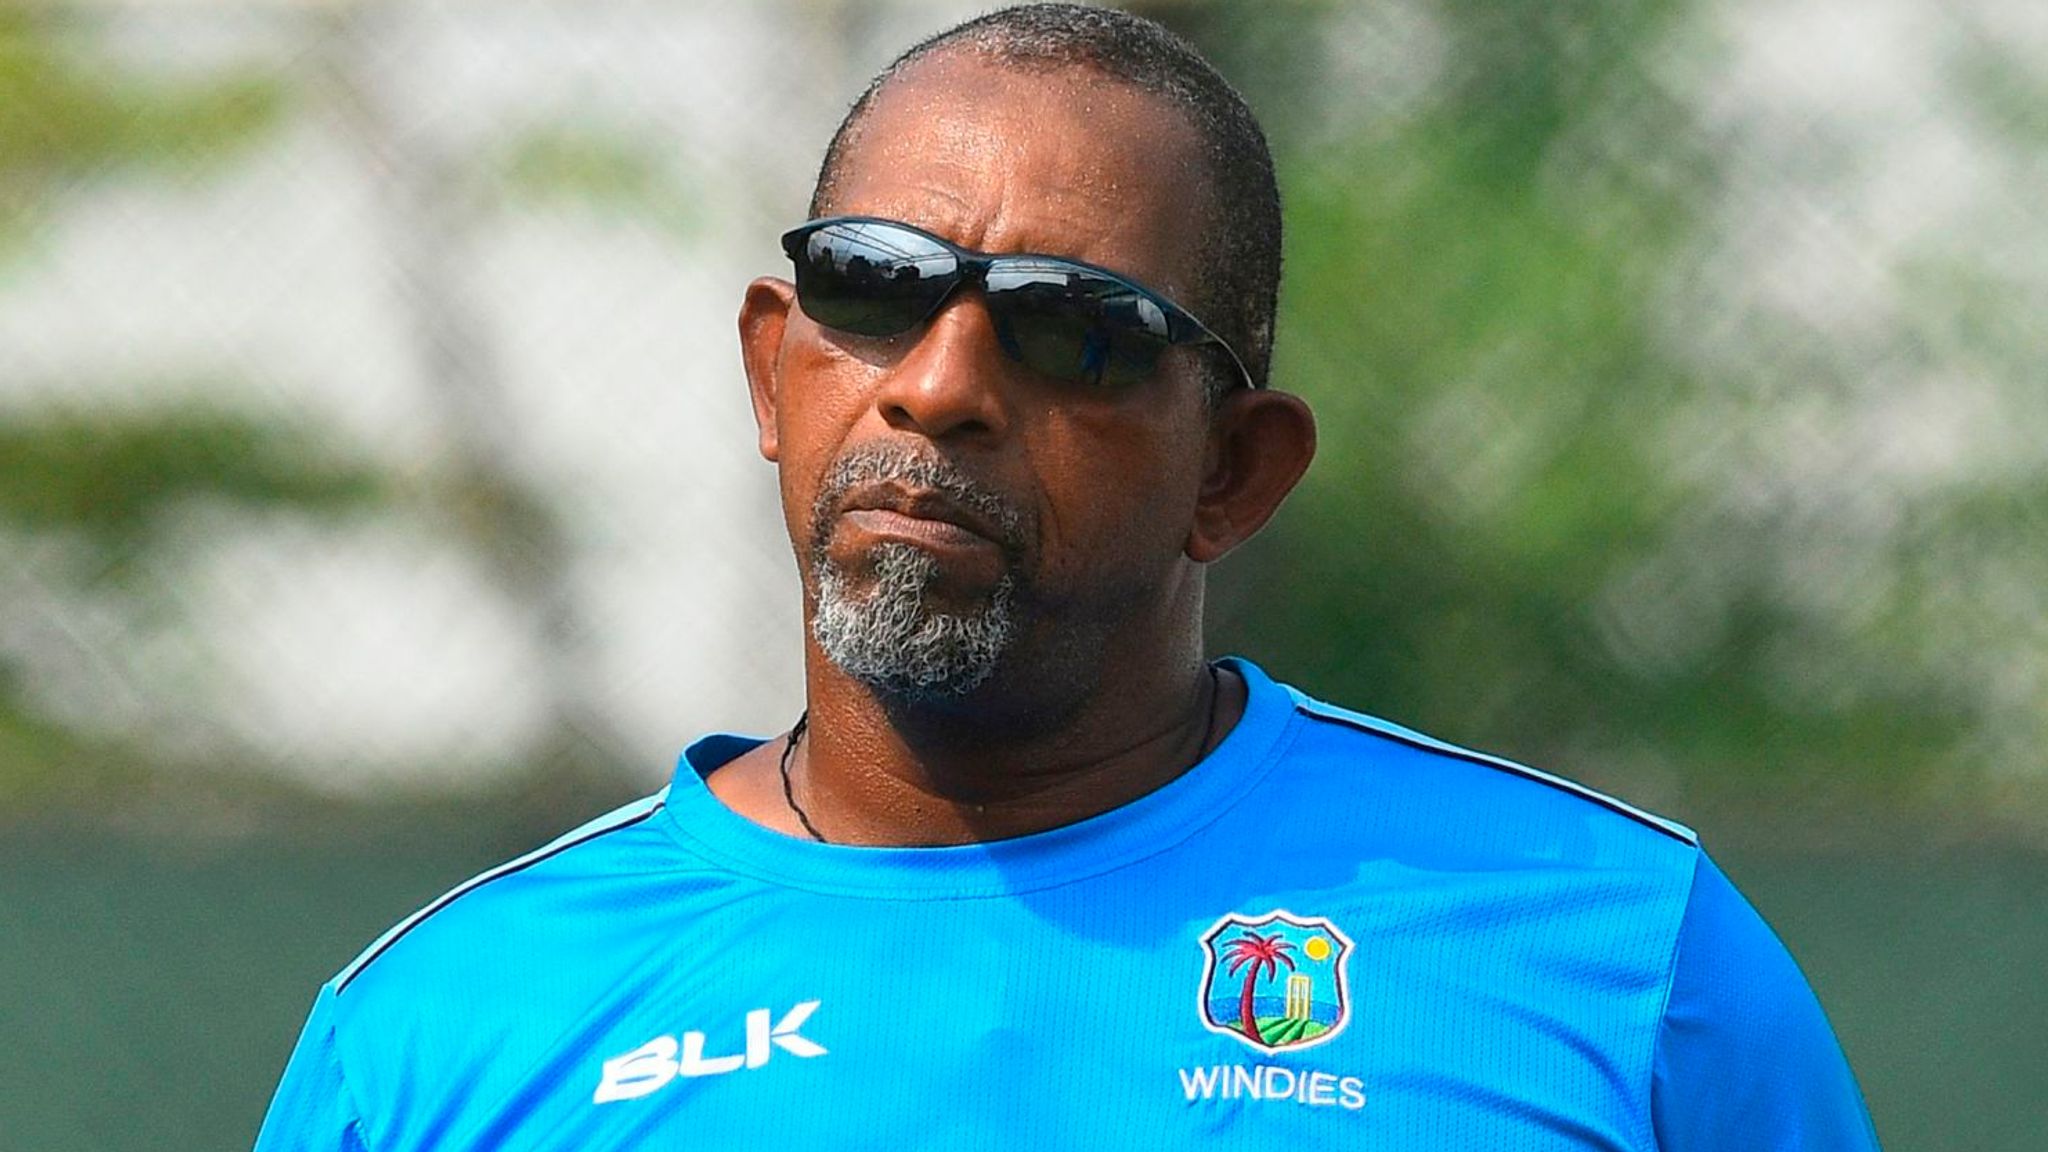 West Indies head coach Phil Simmons&#39; job safe despite attending funeral, says CWI president | Cricket News | Sky Sports